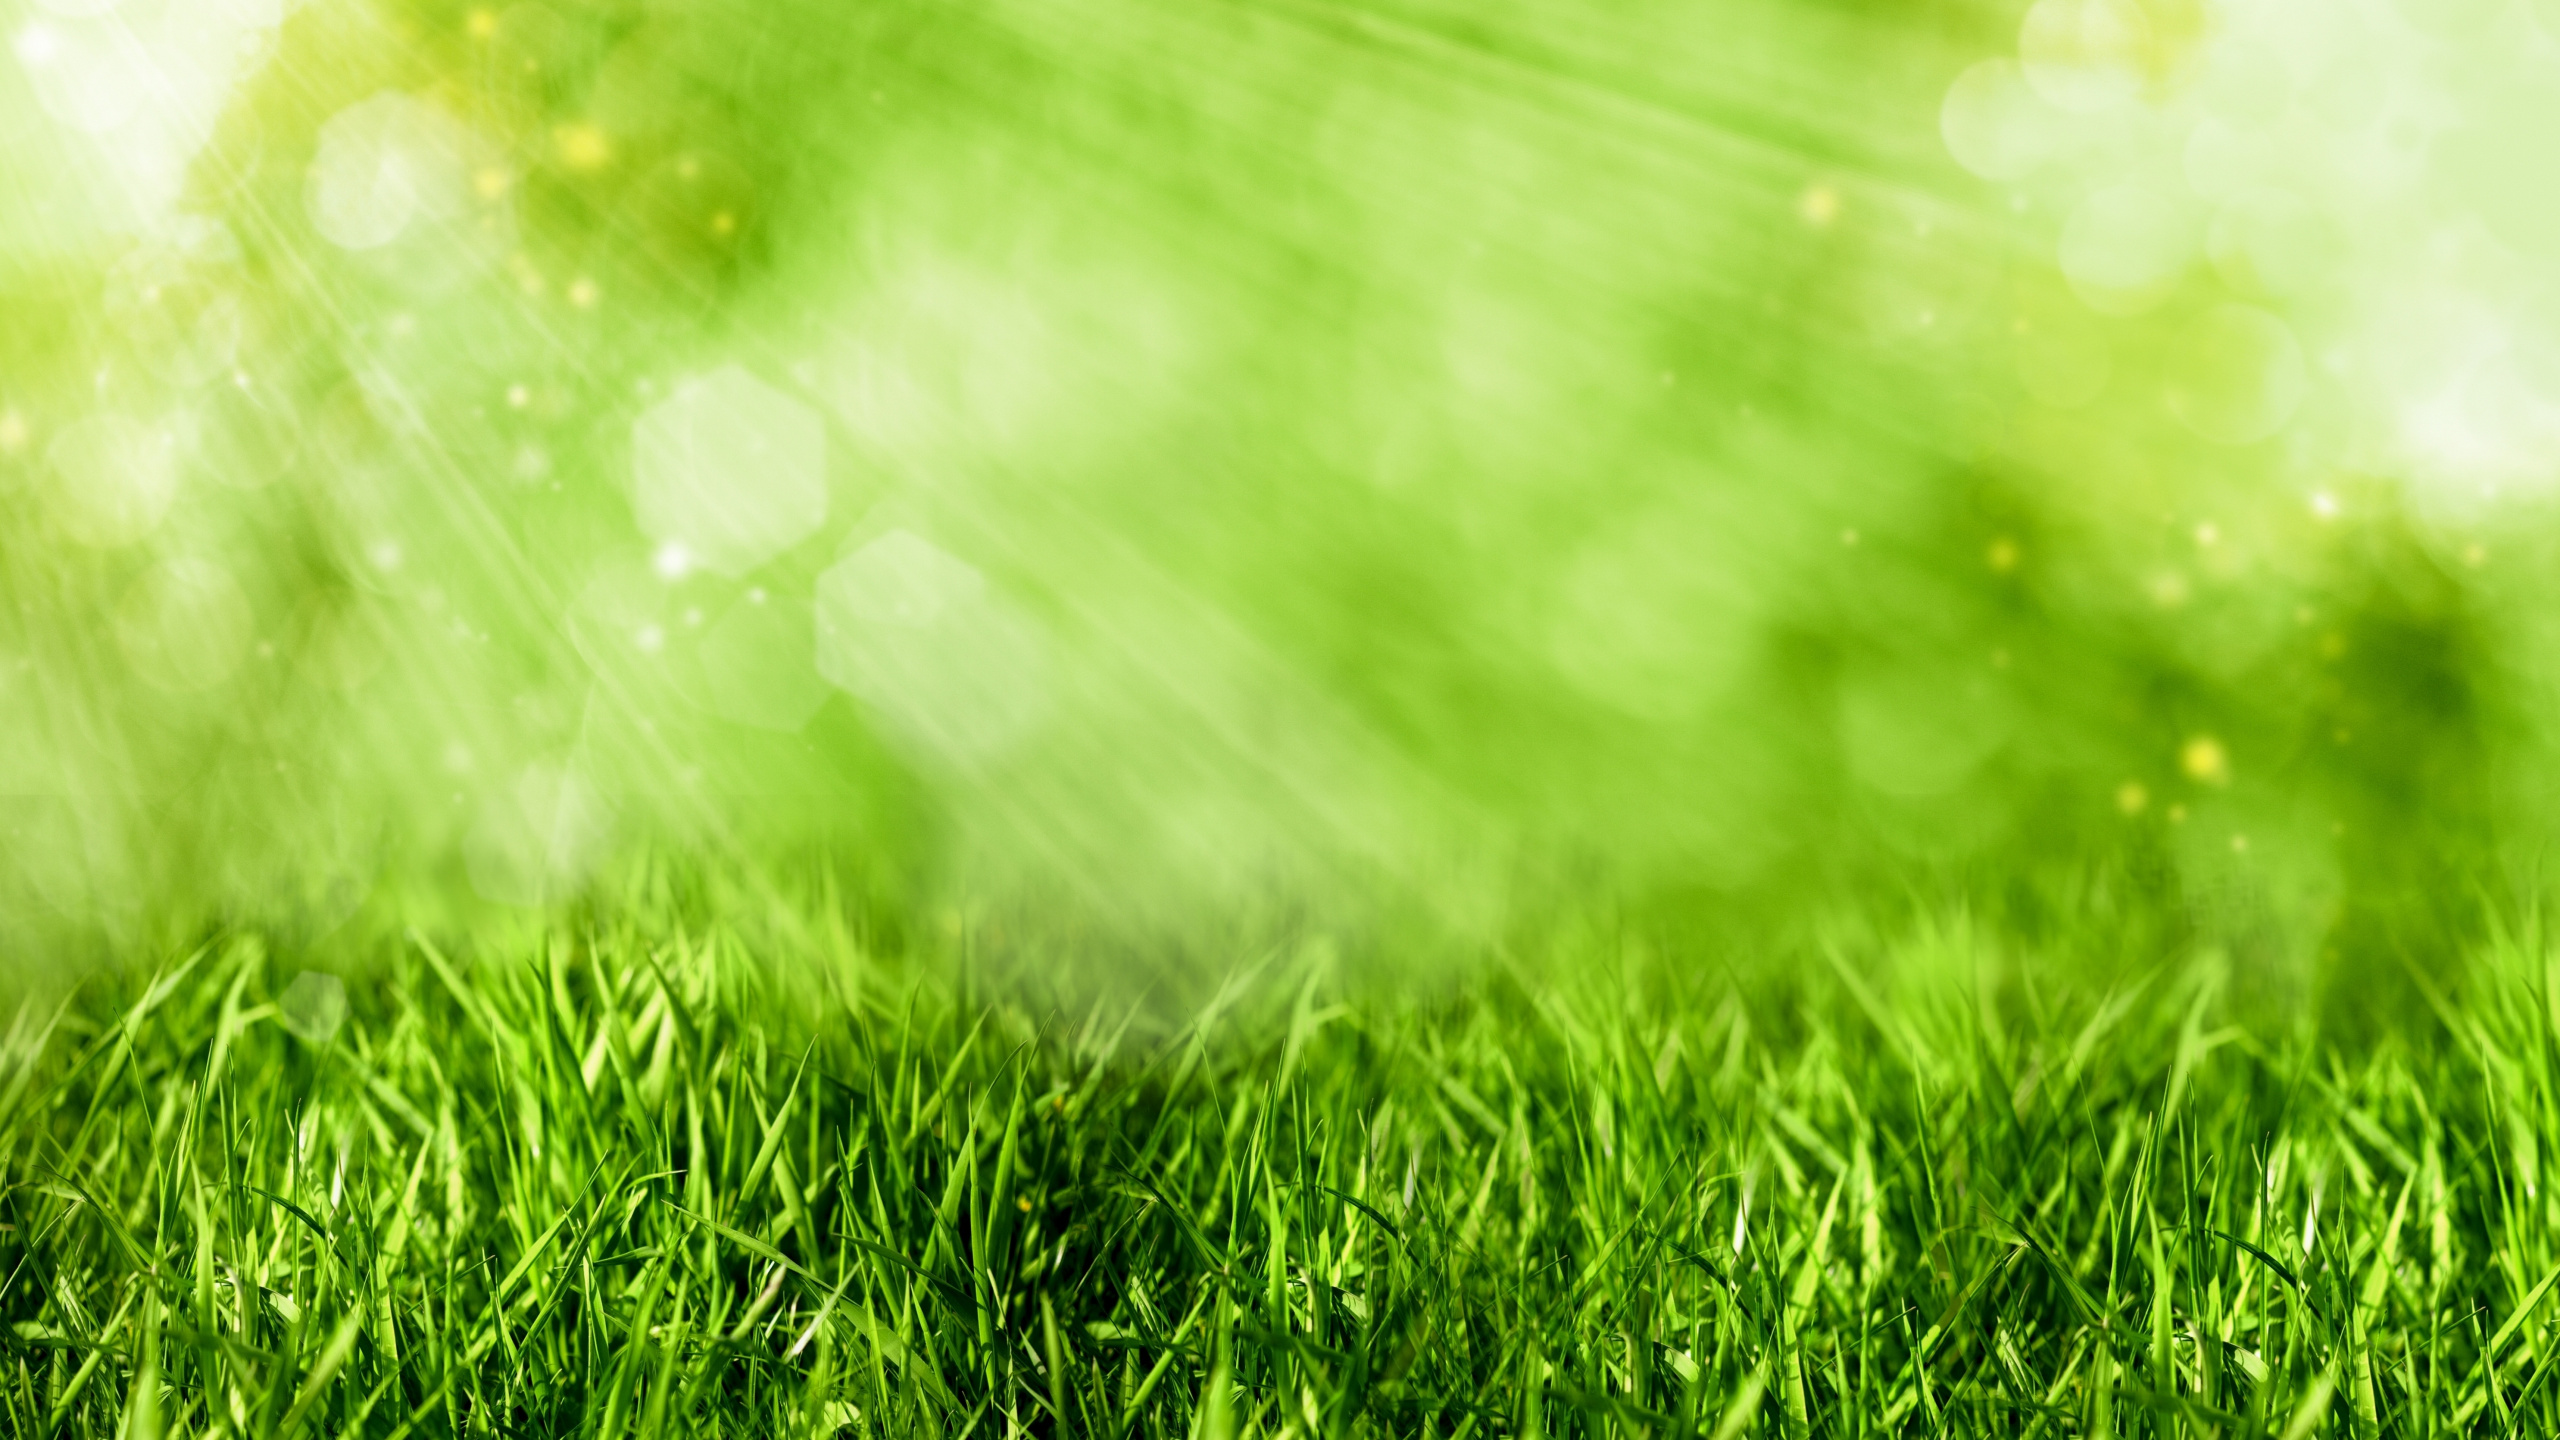 Water Droplets on Green Grass During Daytime. Wallpaper in 2560x1440 Resolution